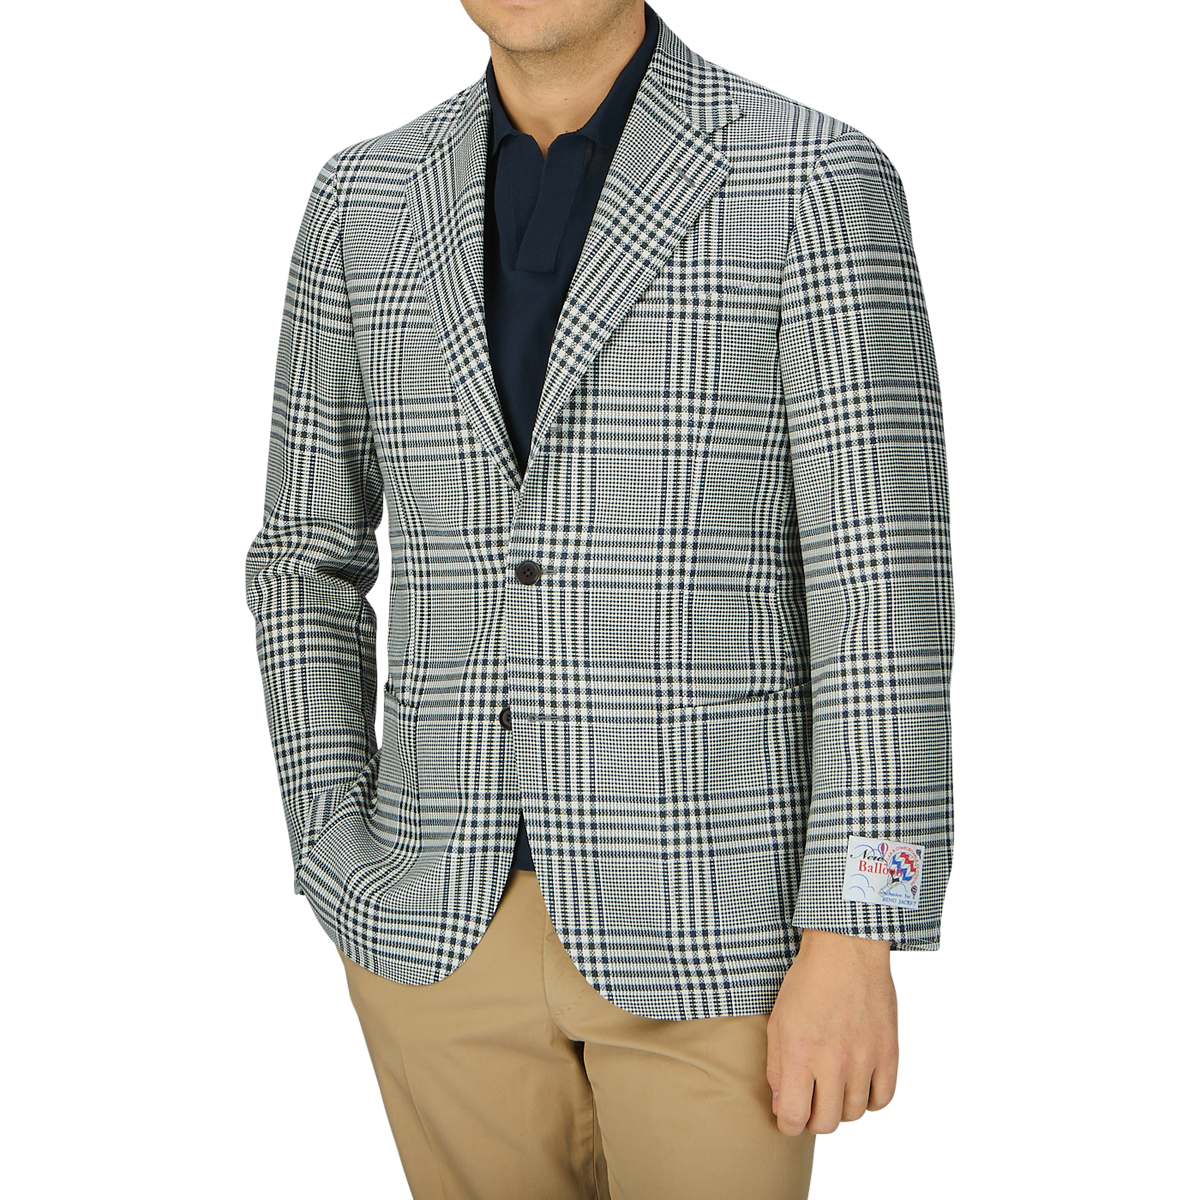 A man wearing a Ring Jacket Blue Green Glen Check Balloon Wool blazer, beige pants, and a dark shirt, photographed from neck to waist against a grey background.